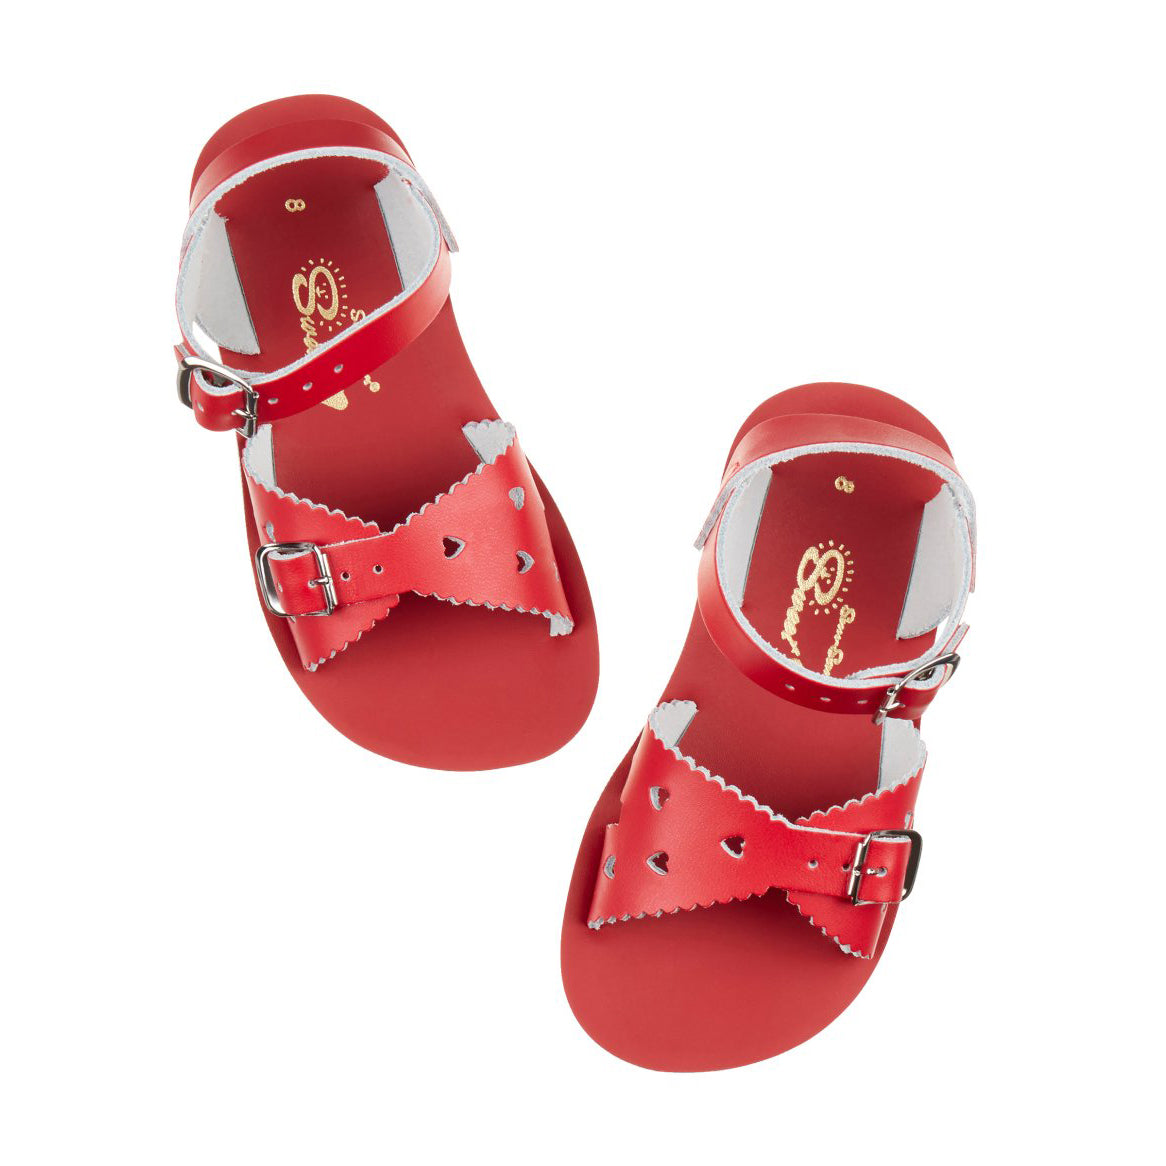 Boys & Girls Red "Sweetheart" Sandals